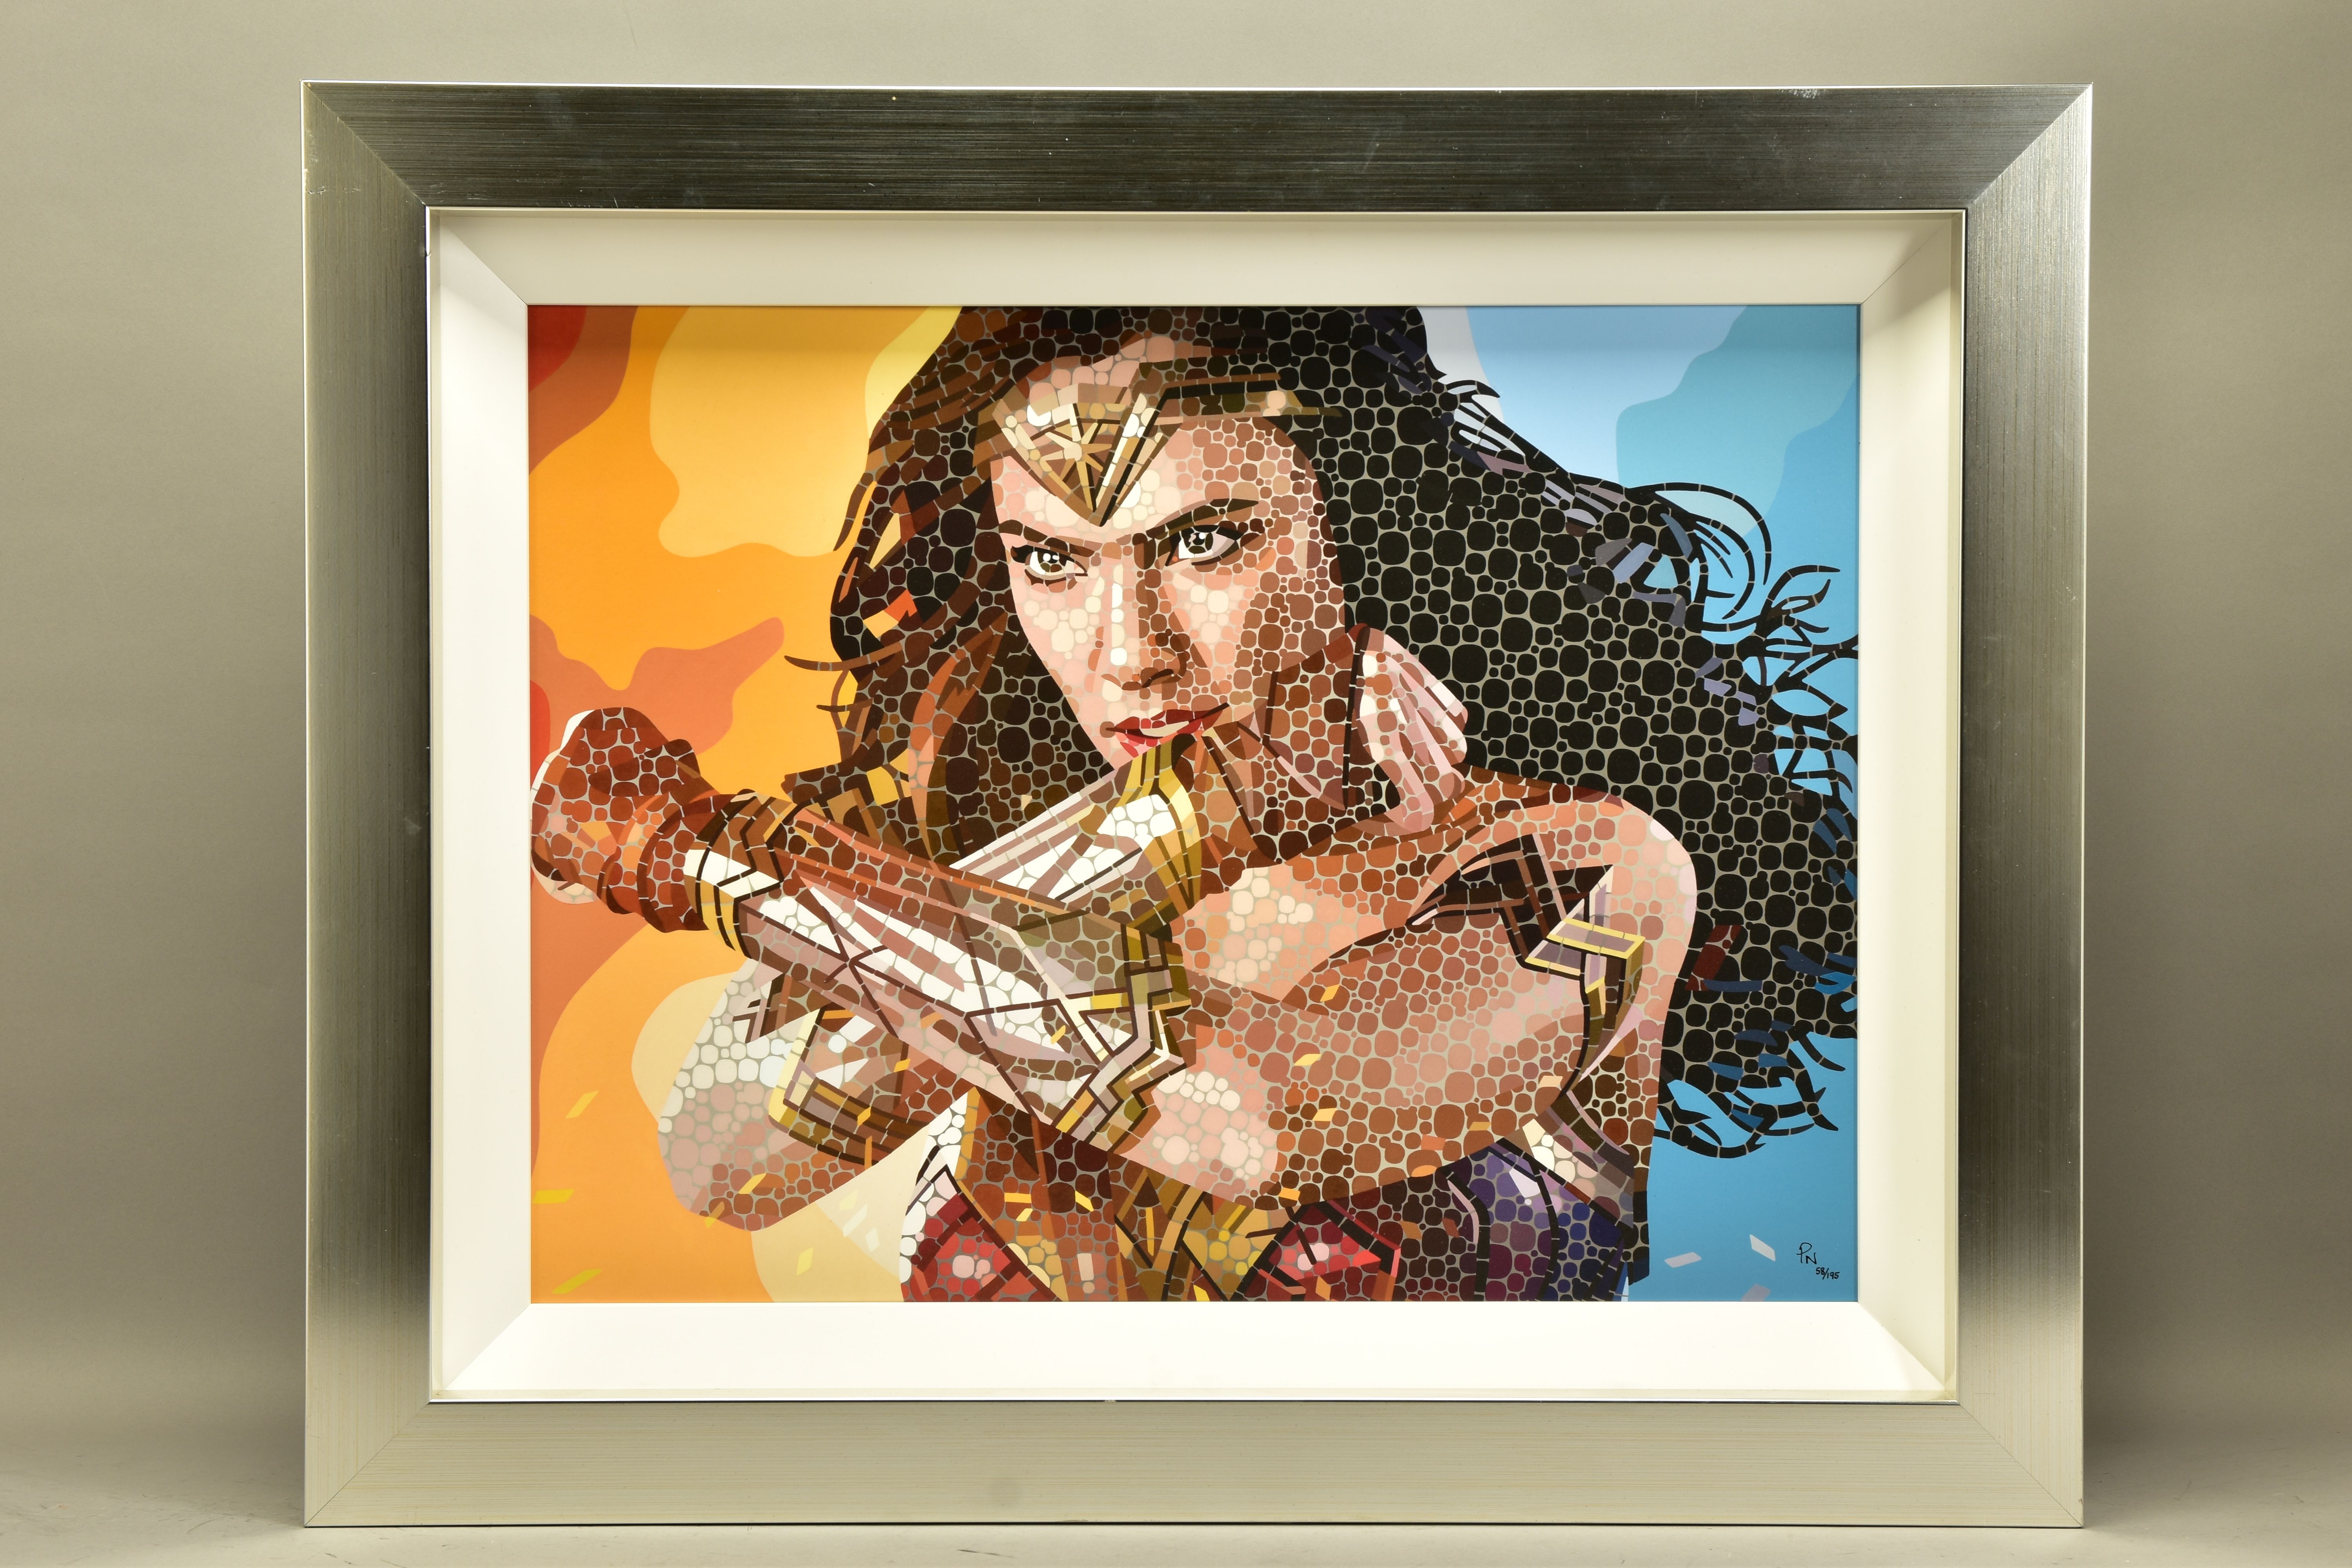 PAUL NORMANSELL (BRITISH 1978) 'THE TIME IS NOW' a signed limited edition print of Gal Gadot as